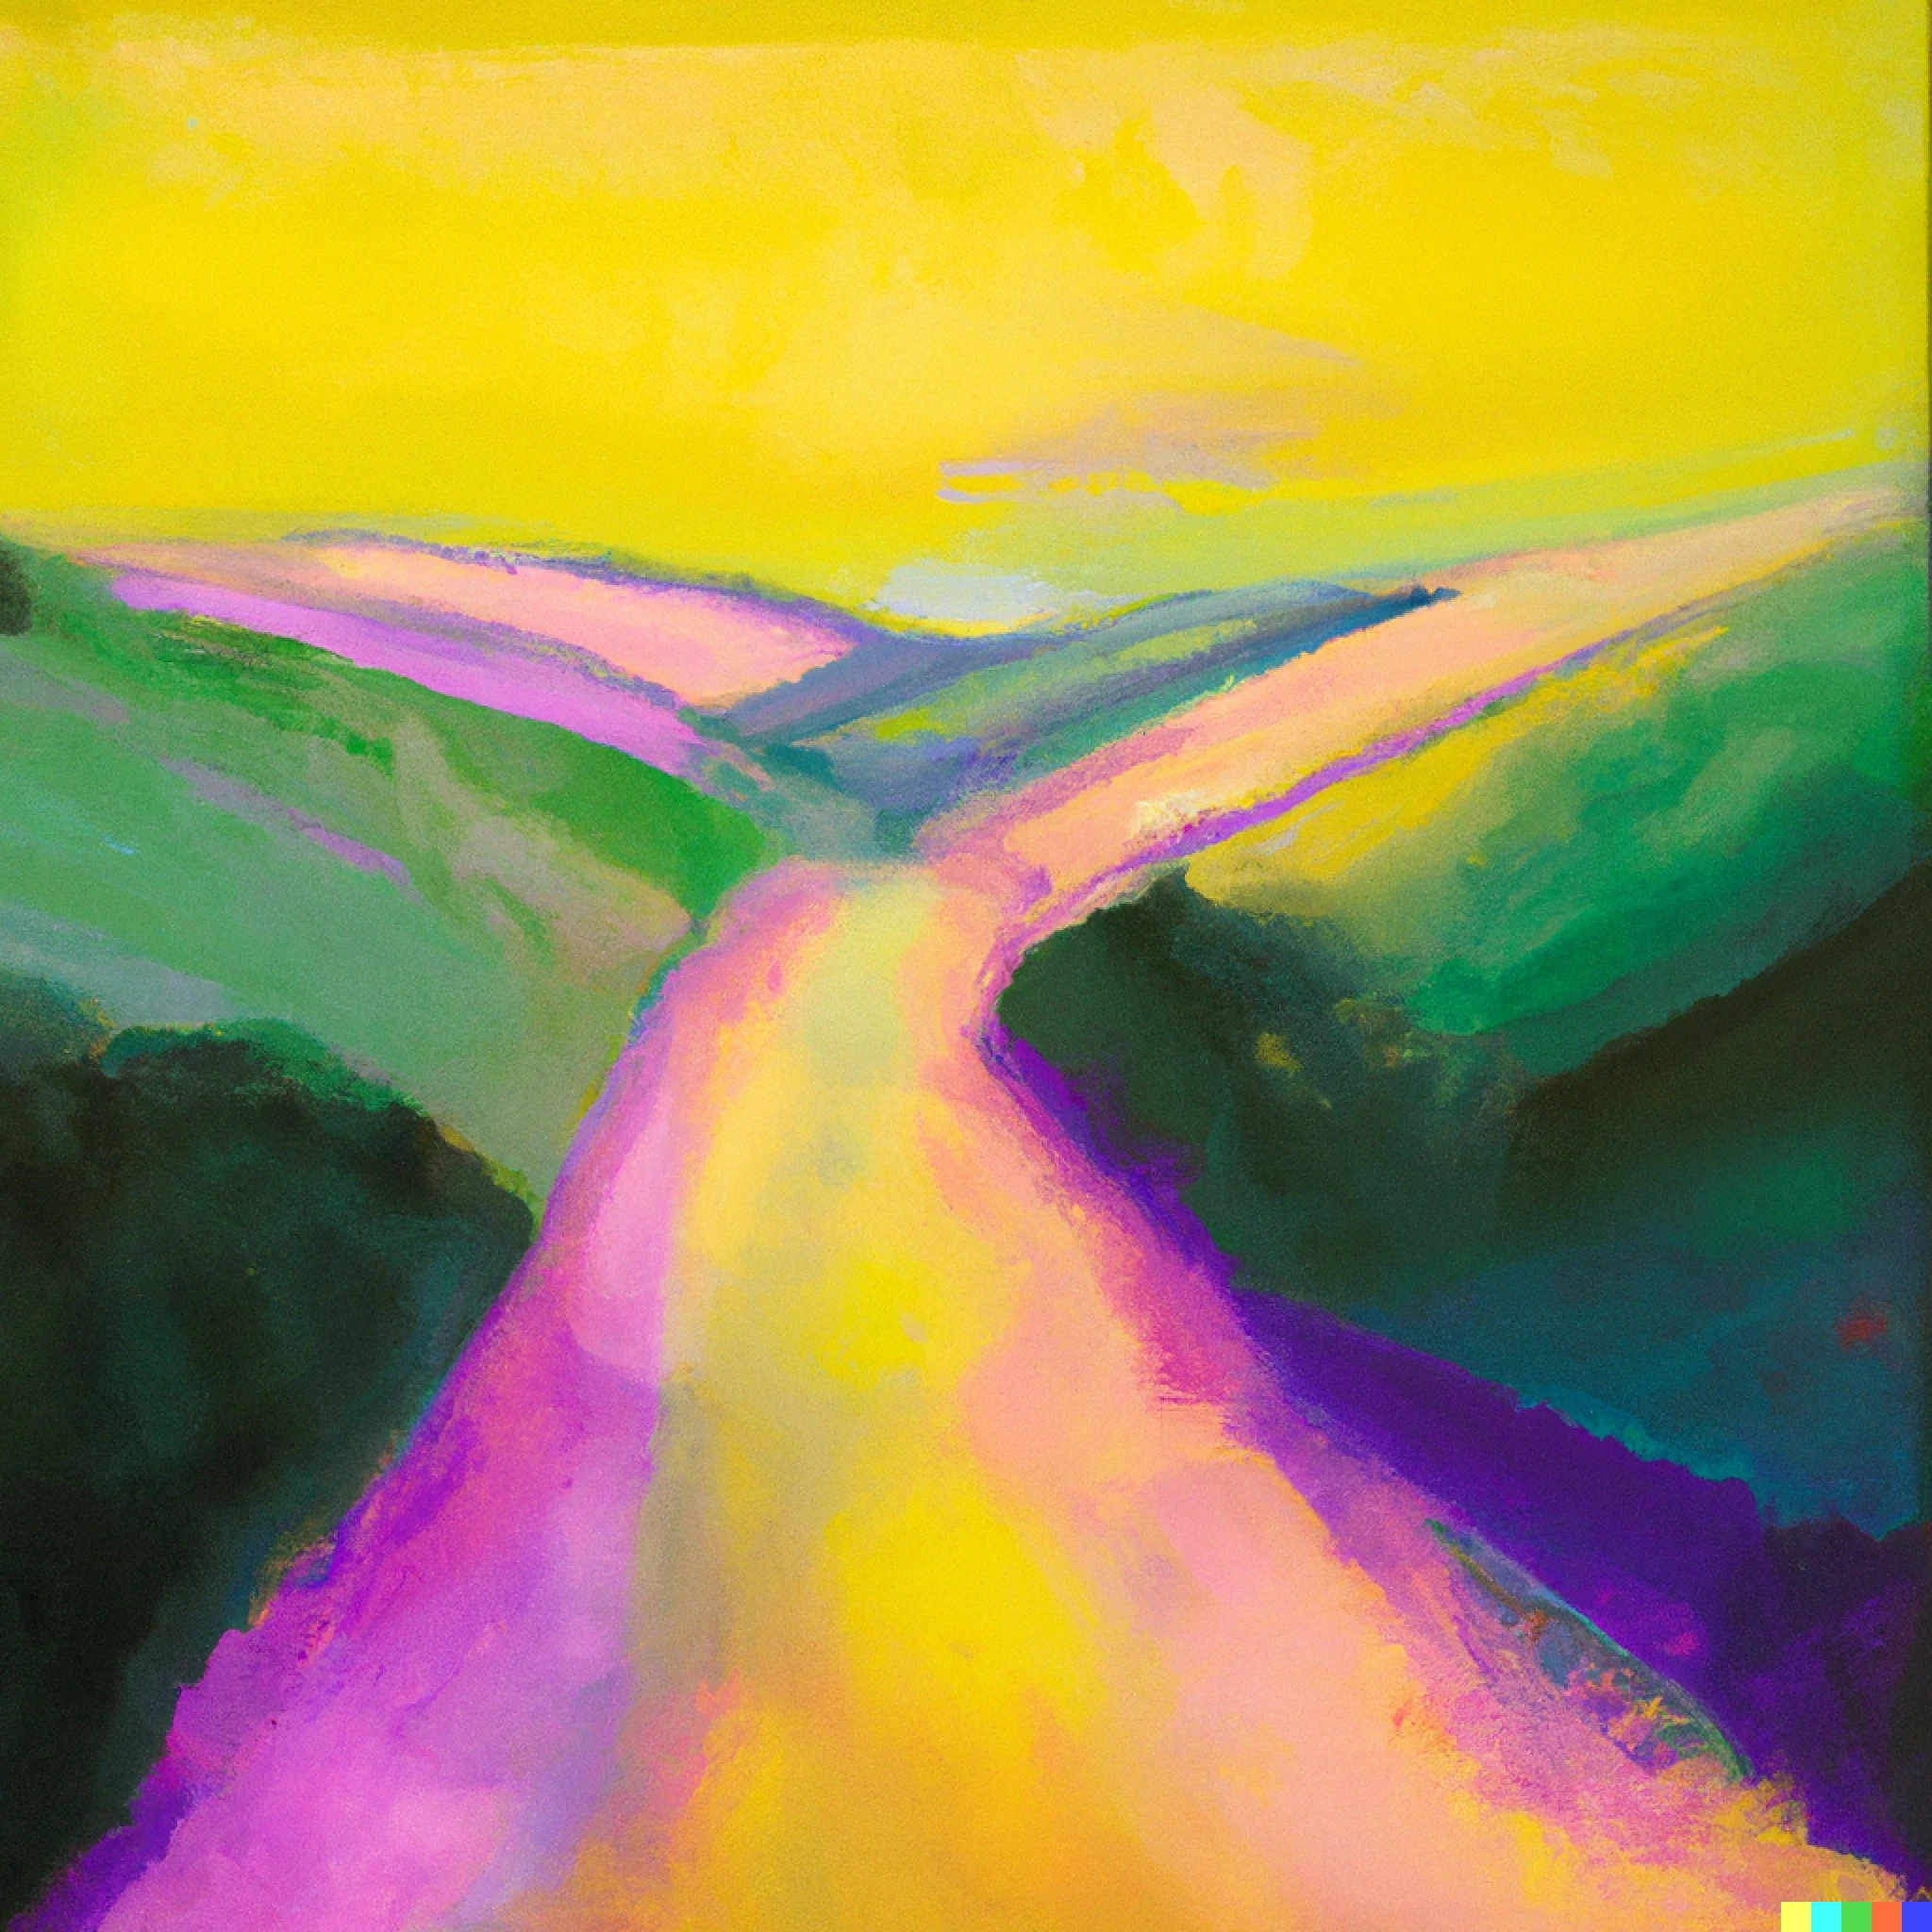 An abstract painterly image of bold colors evoking a road leading into distant hills.